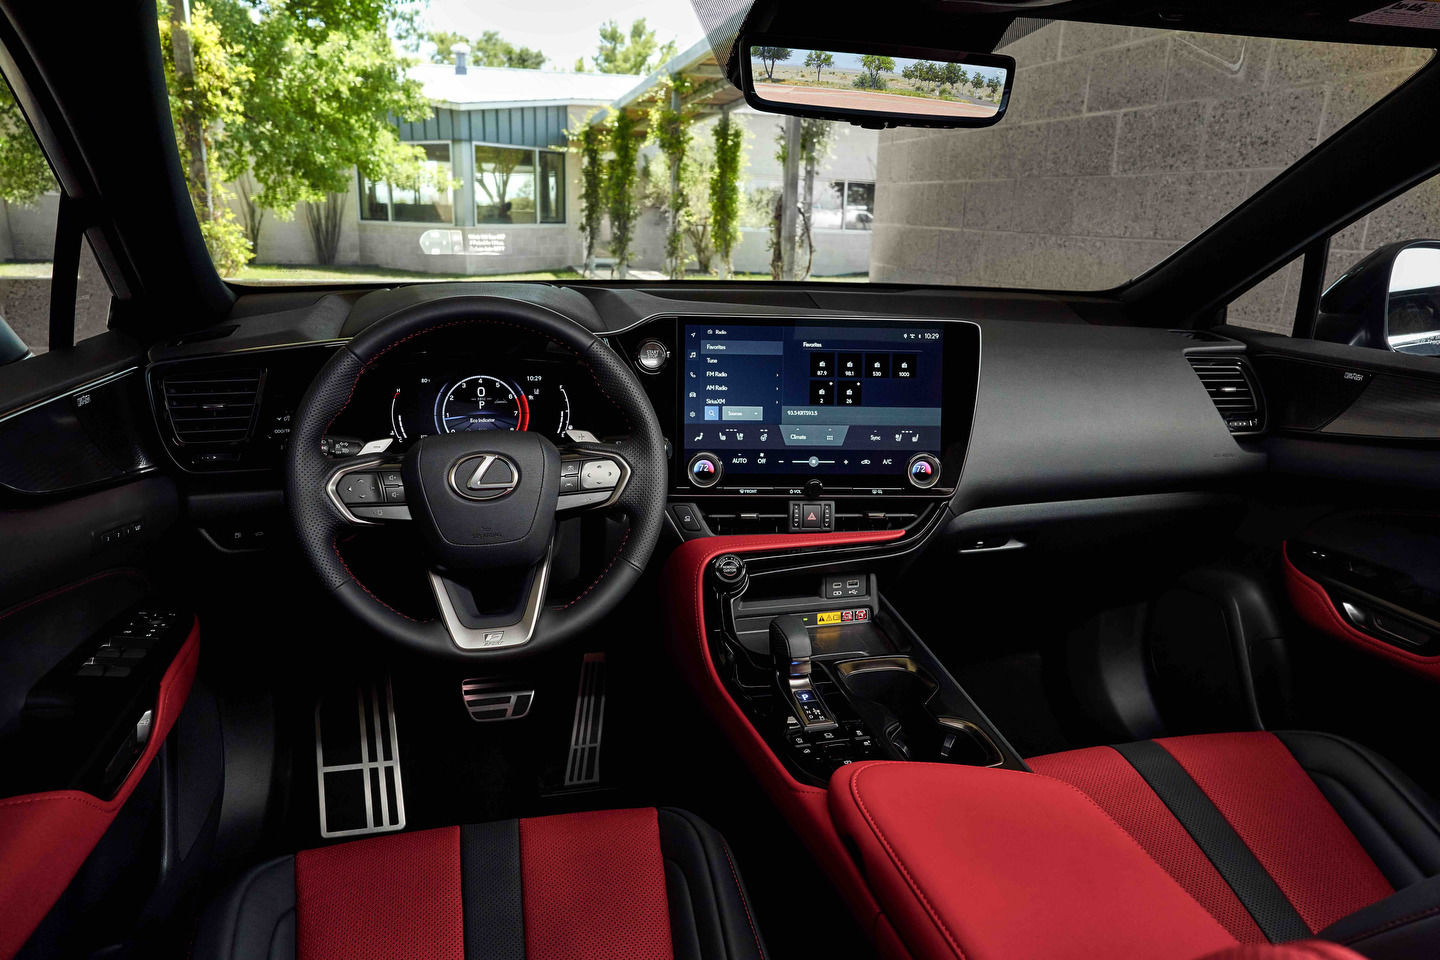 The 2022 Lexus NX shines with its luxurious interior